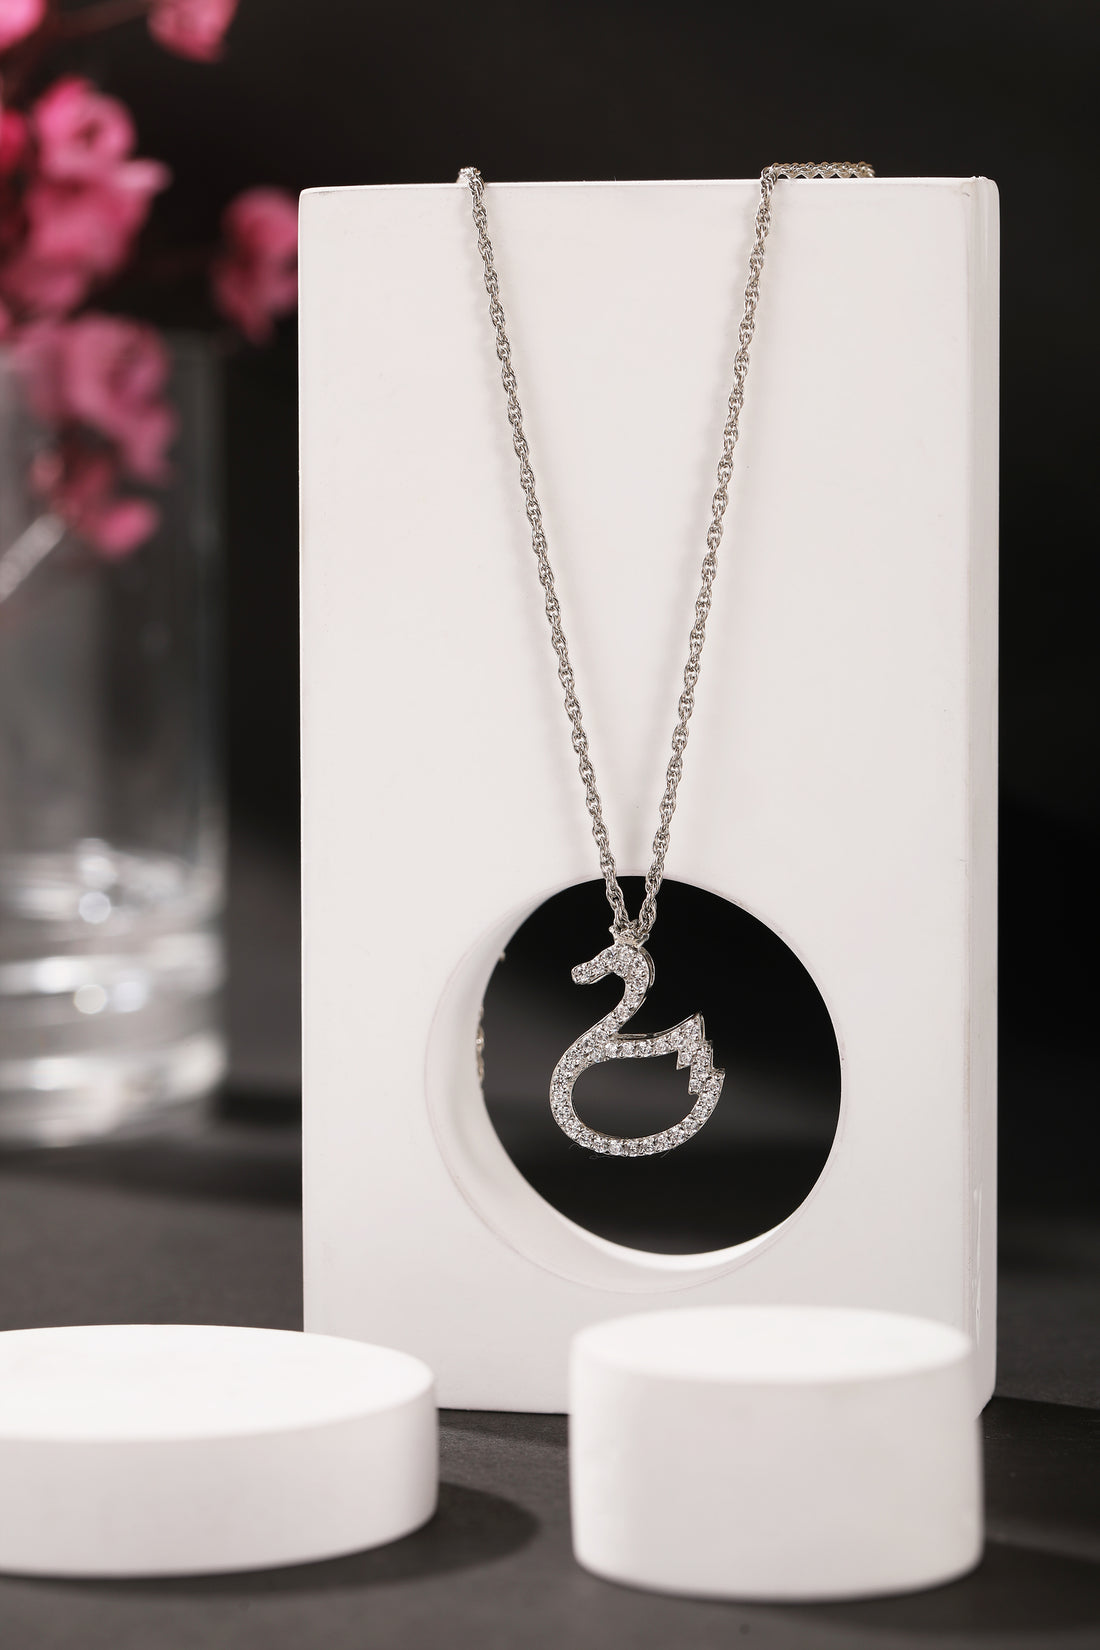 The Crowned Swan pendant